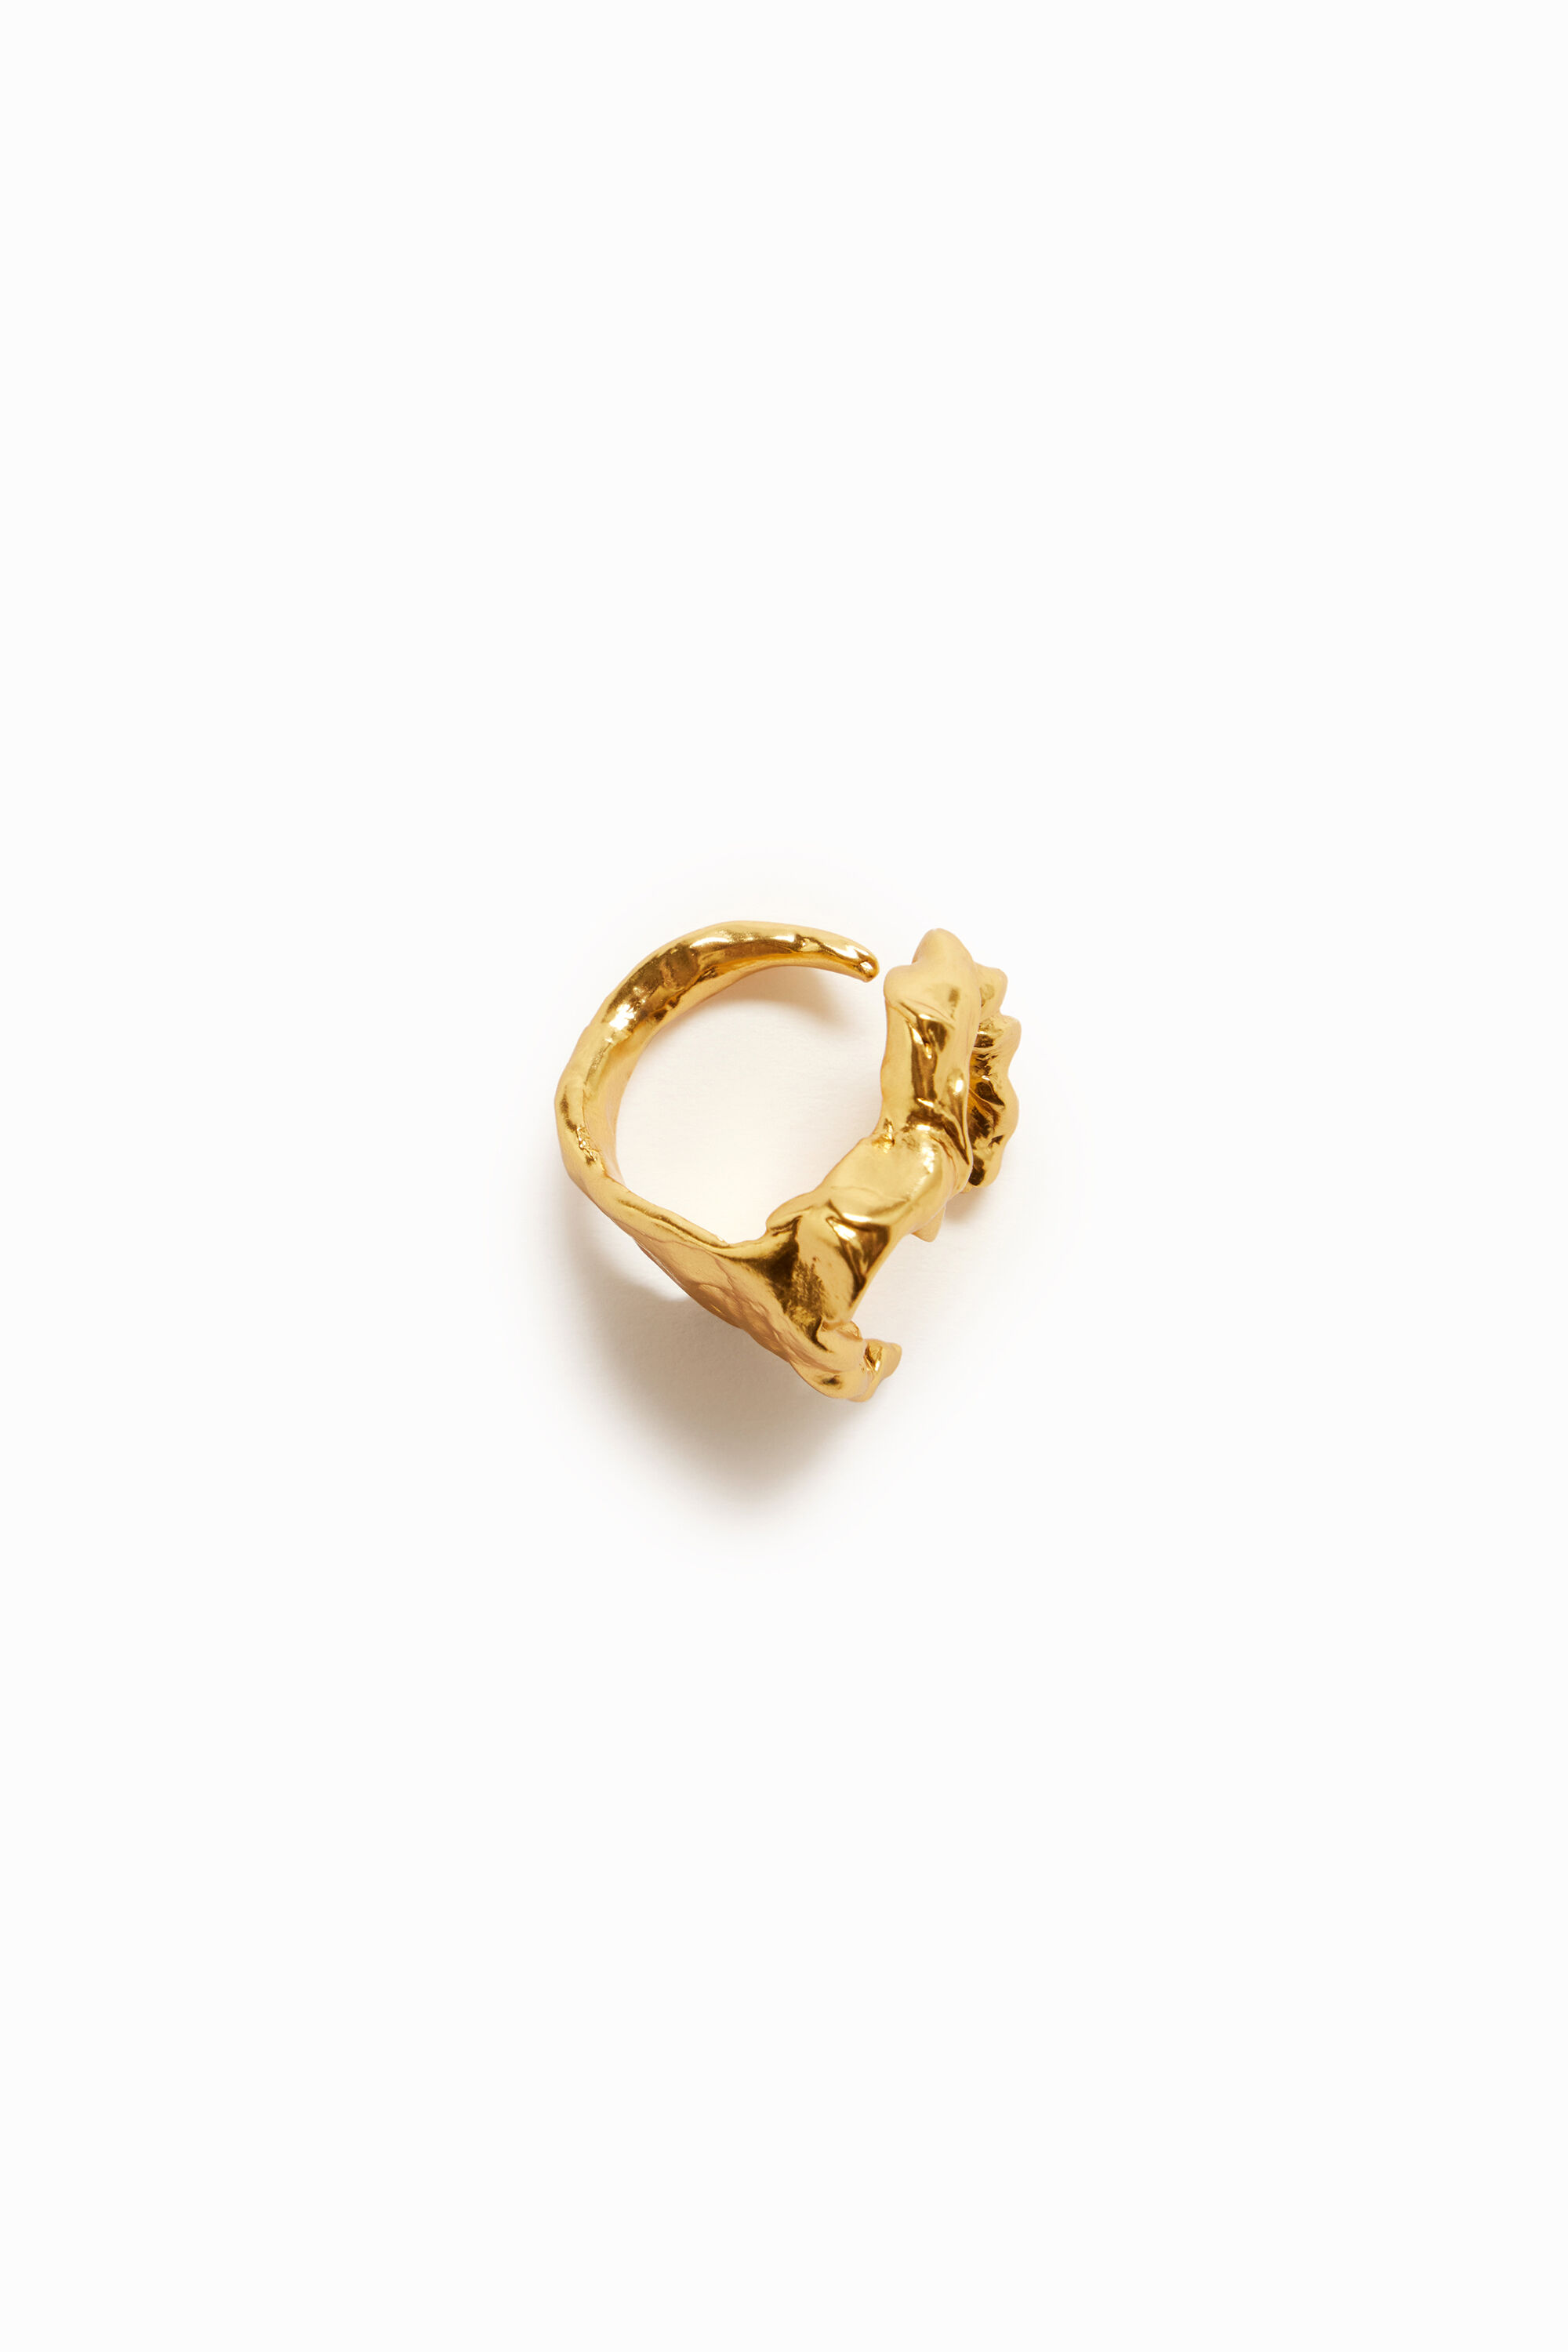 Diamond Heart Statement Dome Ring in Gold | Uncommon James